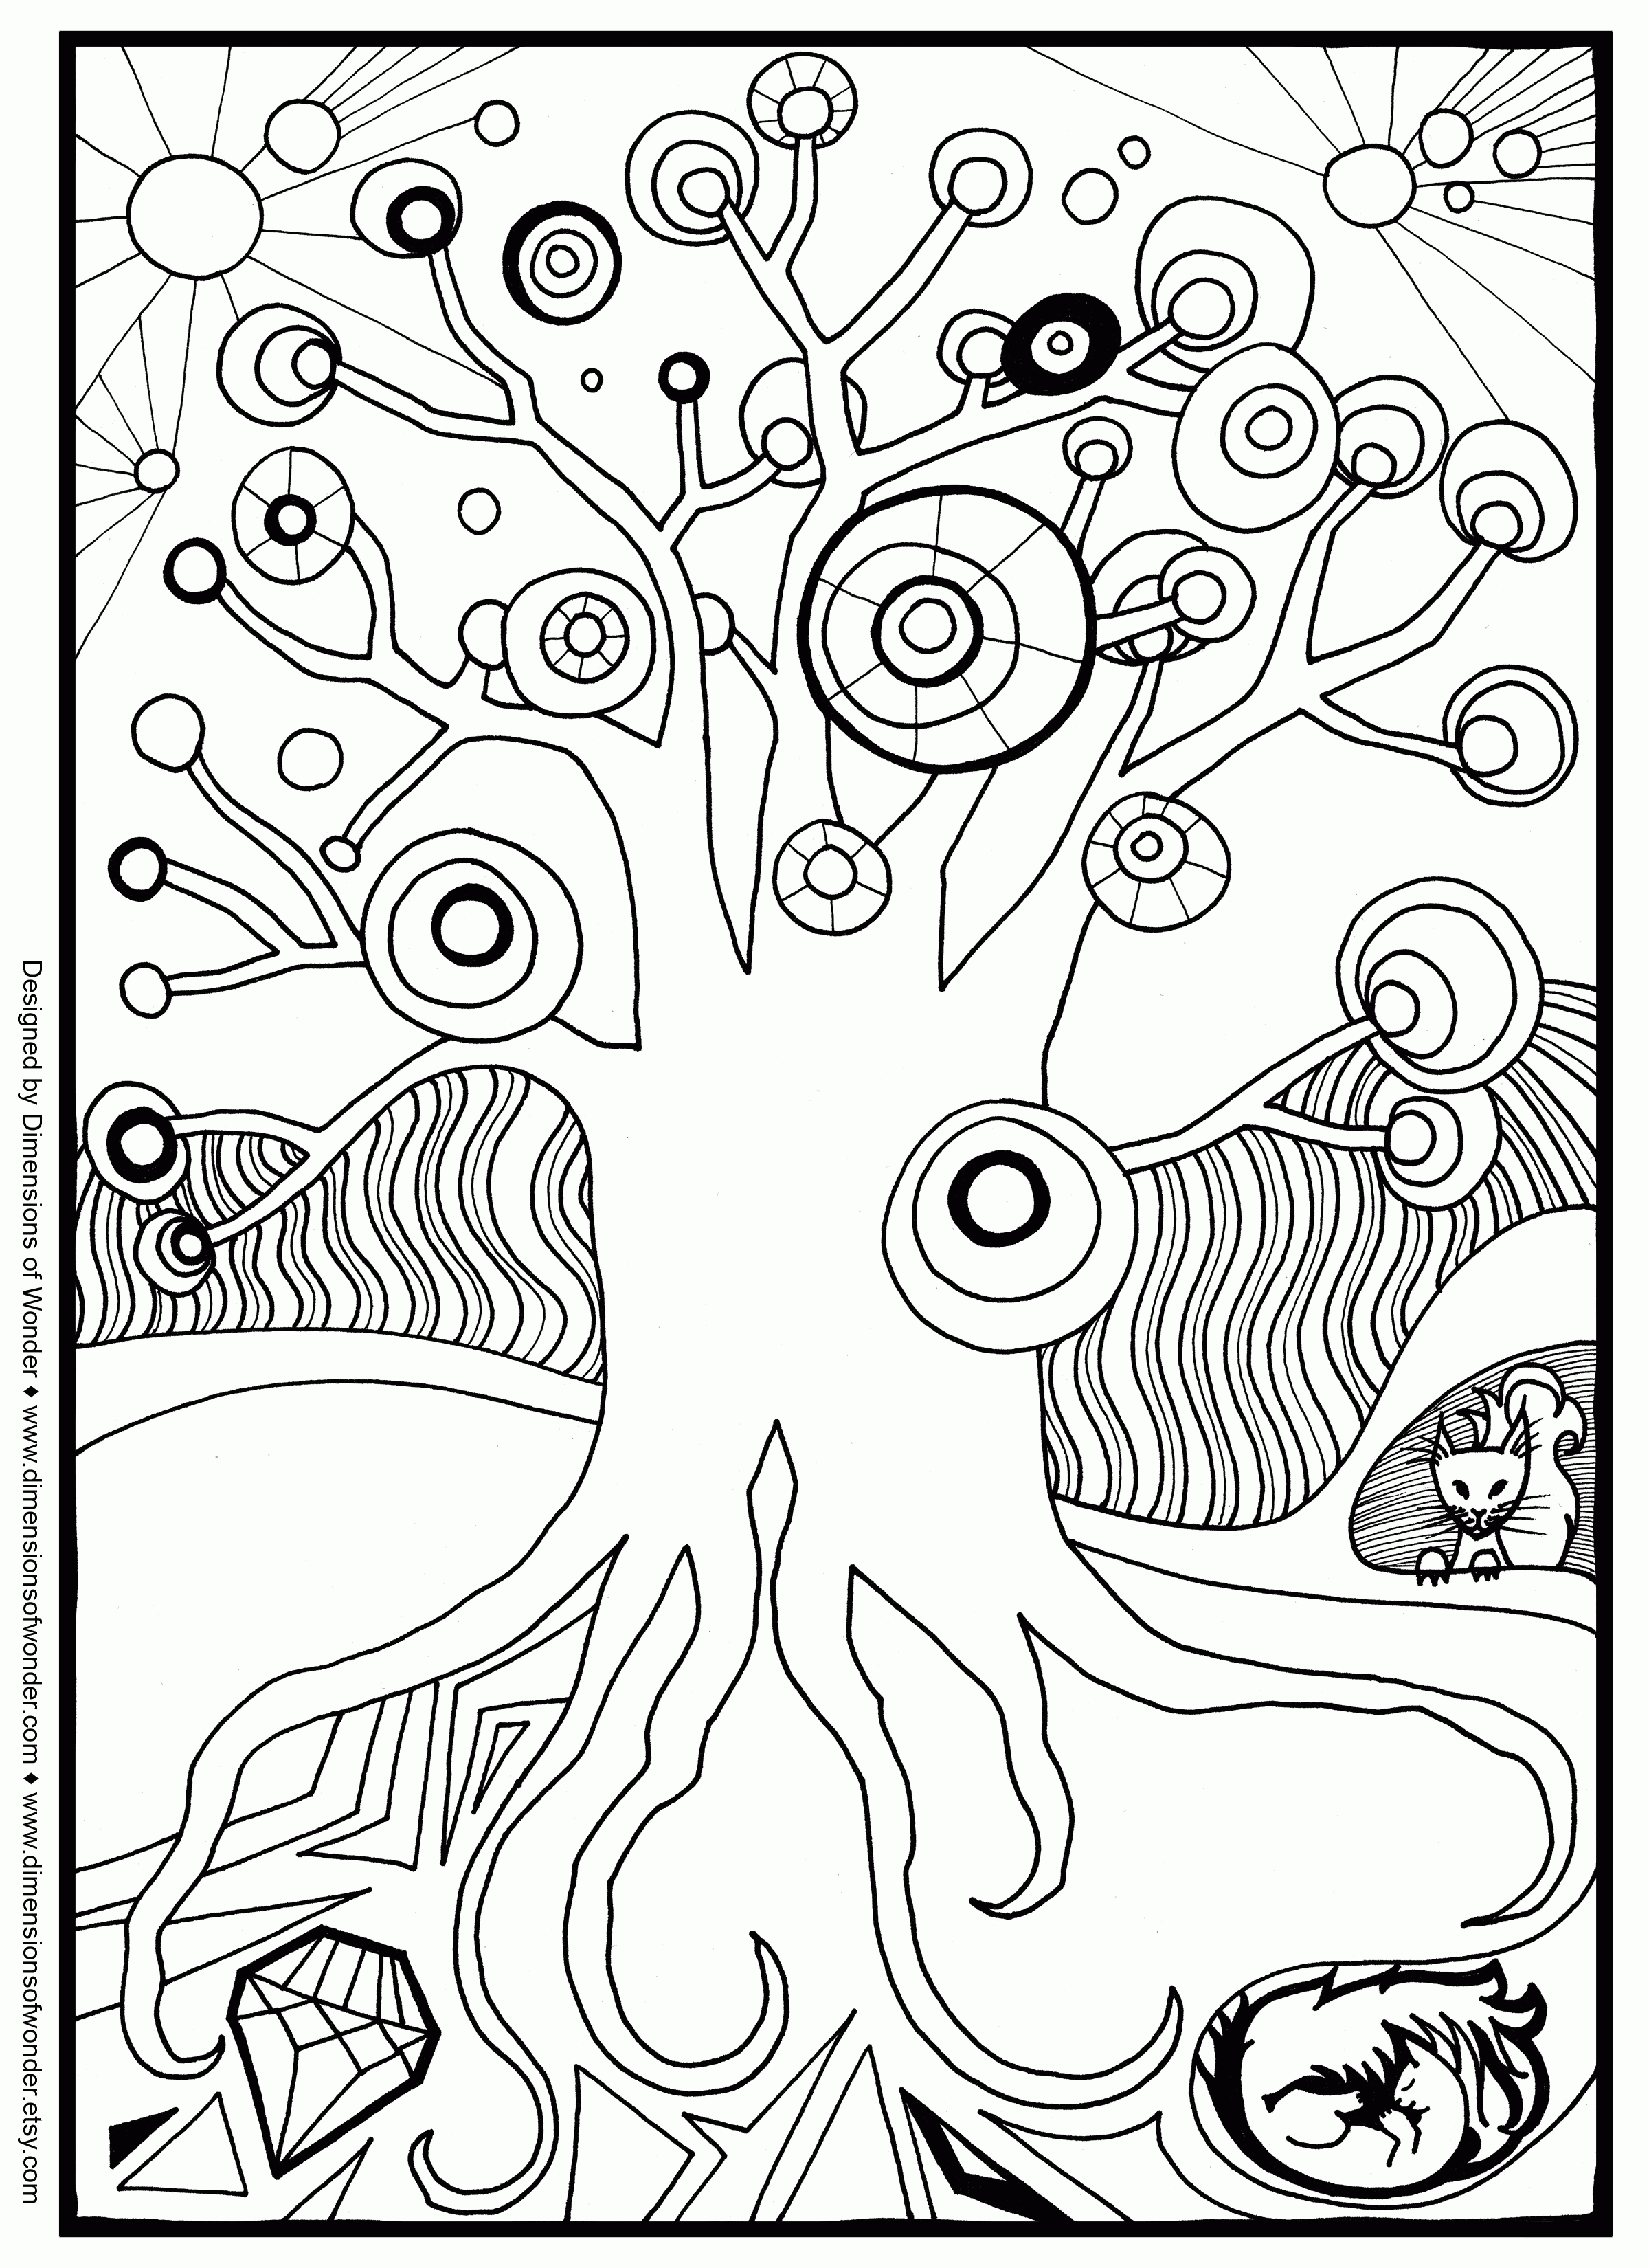 Winter Coloring Pages For Middle School   Coloring Home